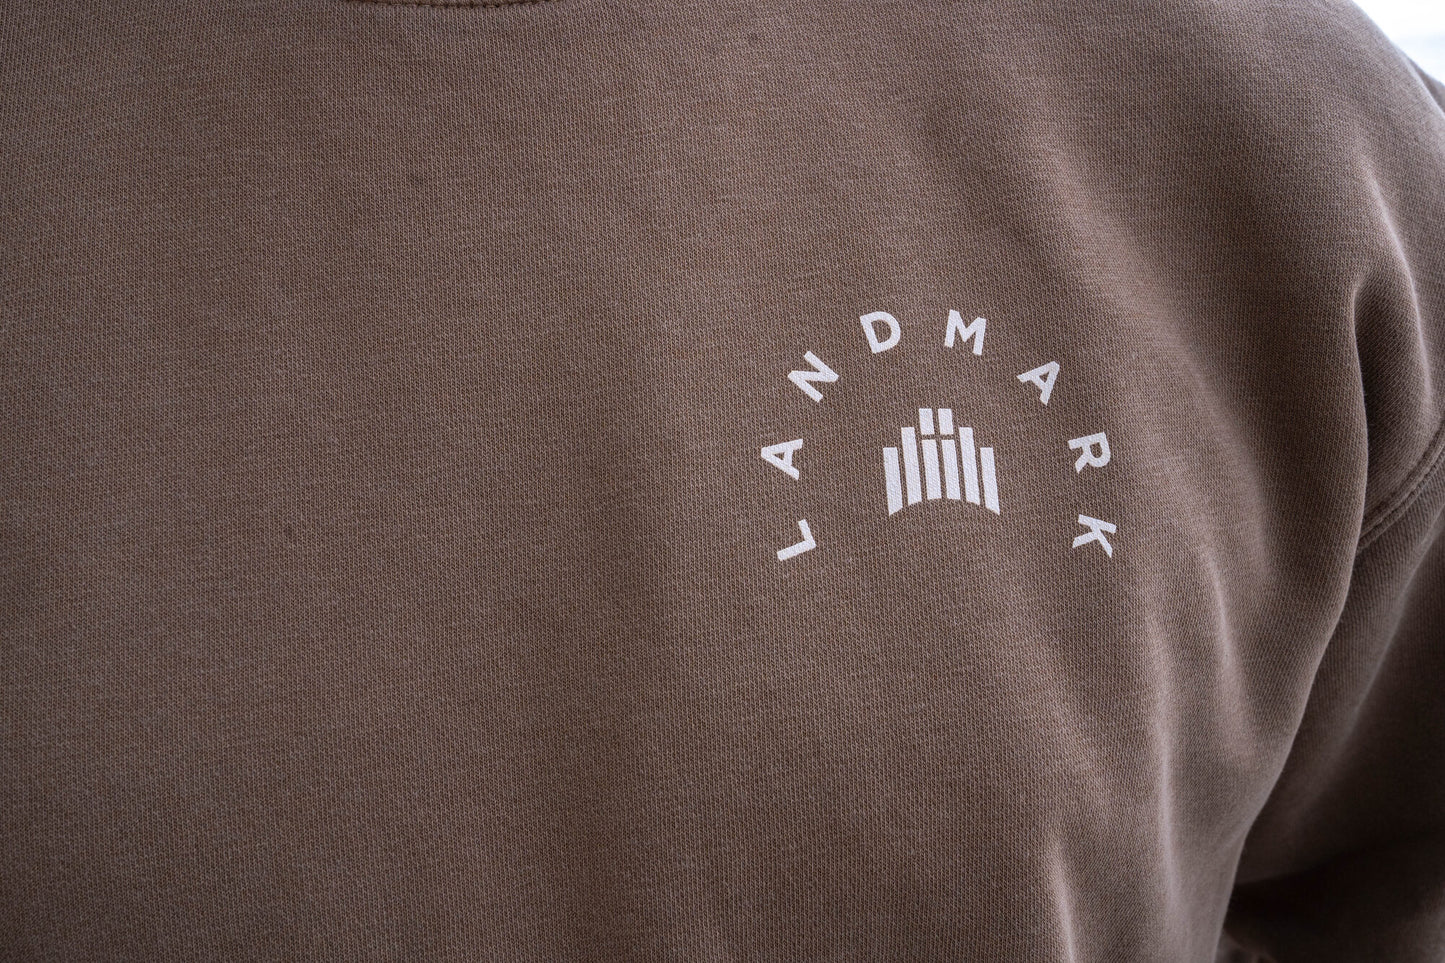 For Our Community Midweight Crewneck